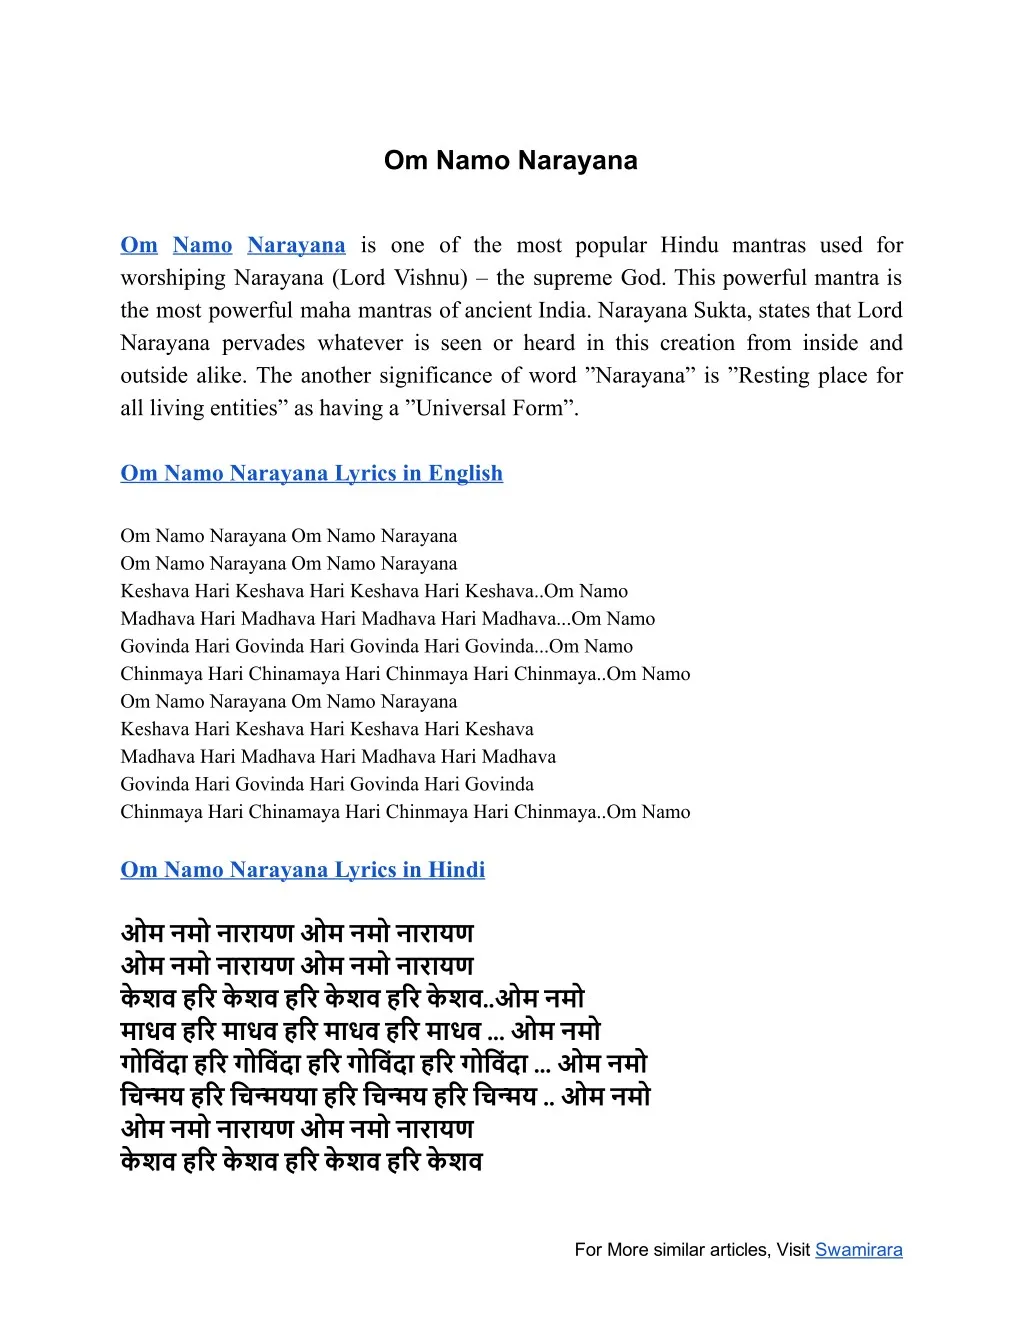 Ppt Om Namo Narayana Lyrics And Meanins Powerpoint Presentation Free Download Id